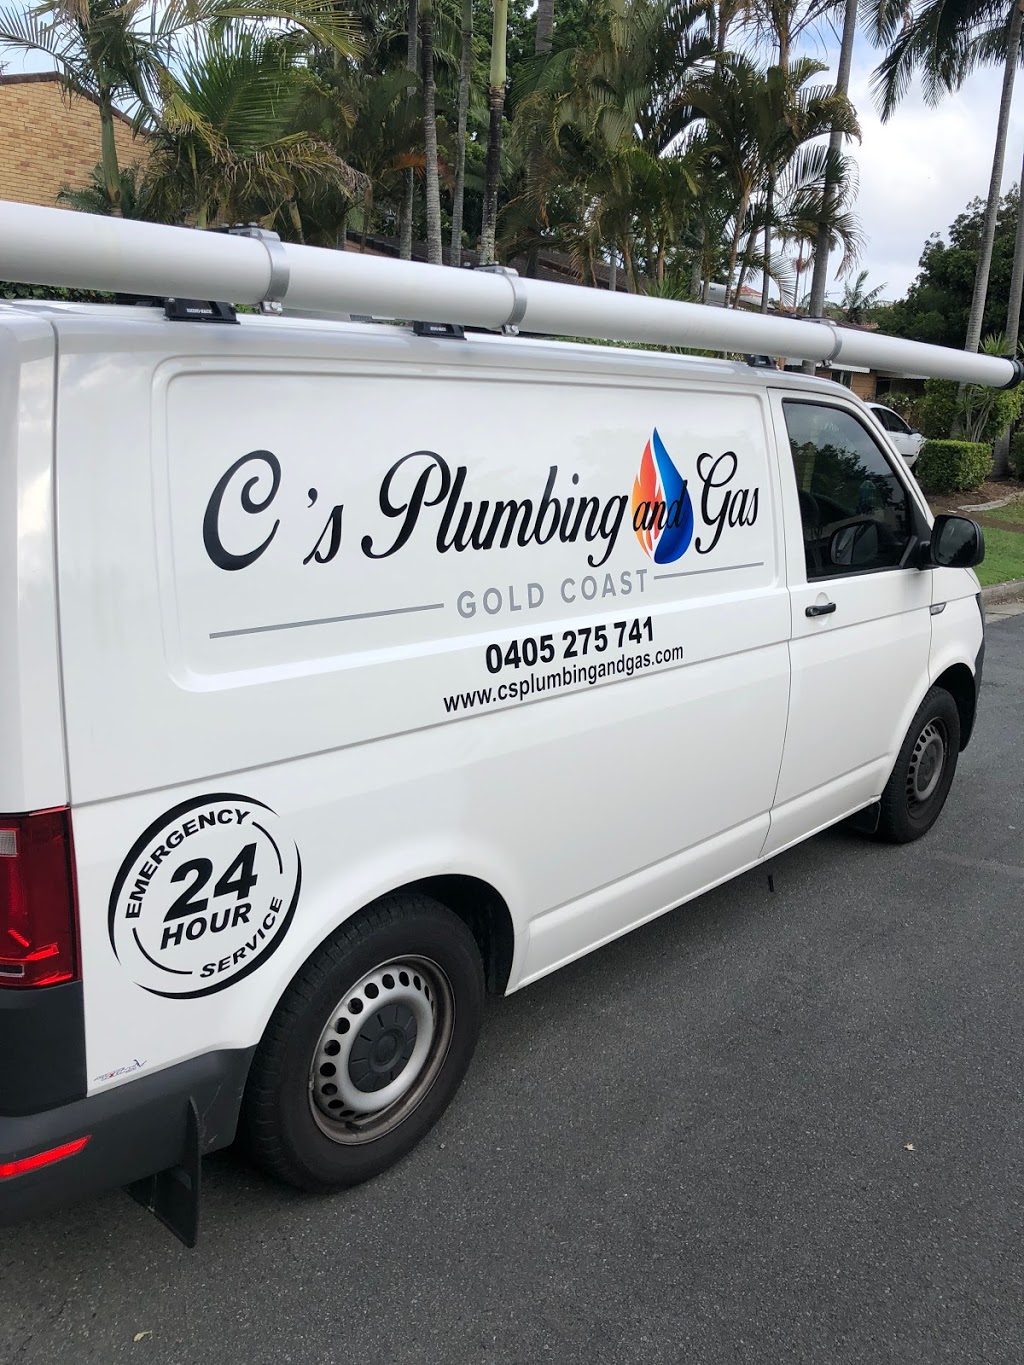 C’s Plumbing and Gas Gold Coast | plumber | 2 Riverview Parade, Surfers Paradise QLD 4217, Australia | 0405275741 OR +61 405 275 741